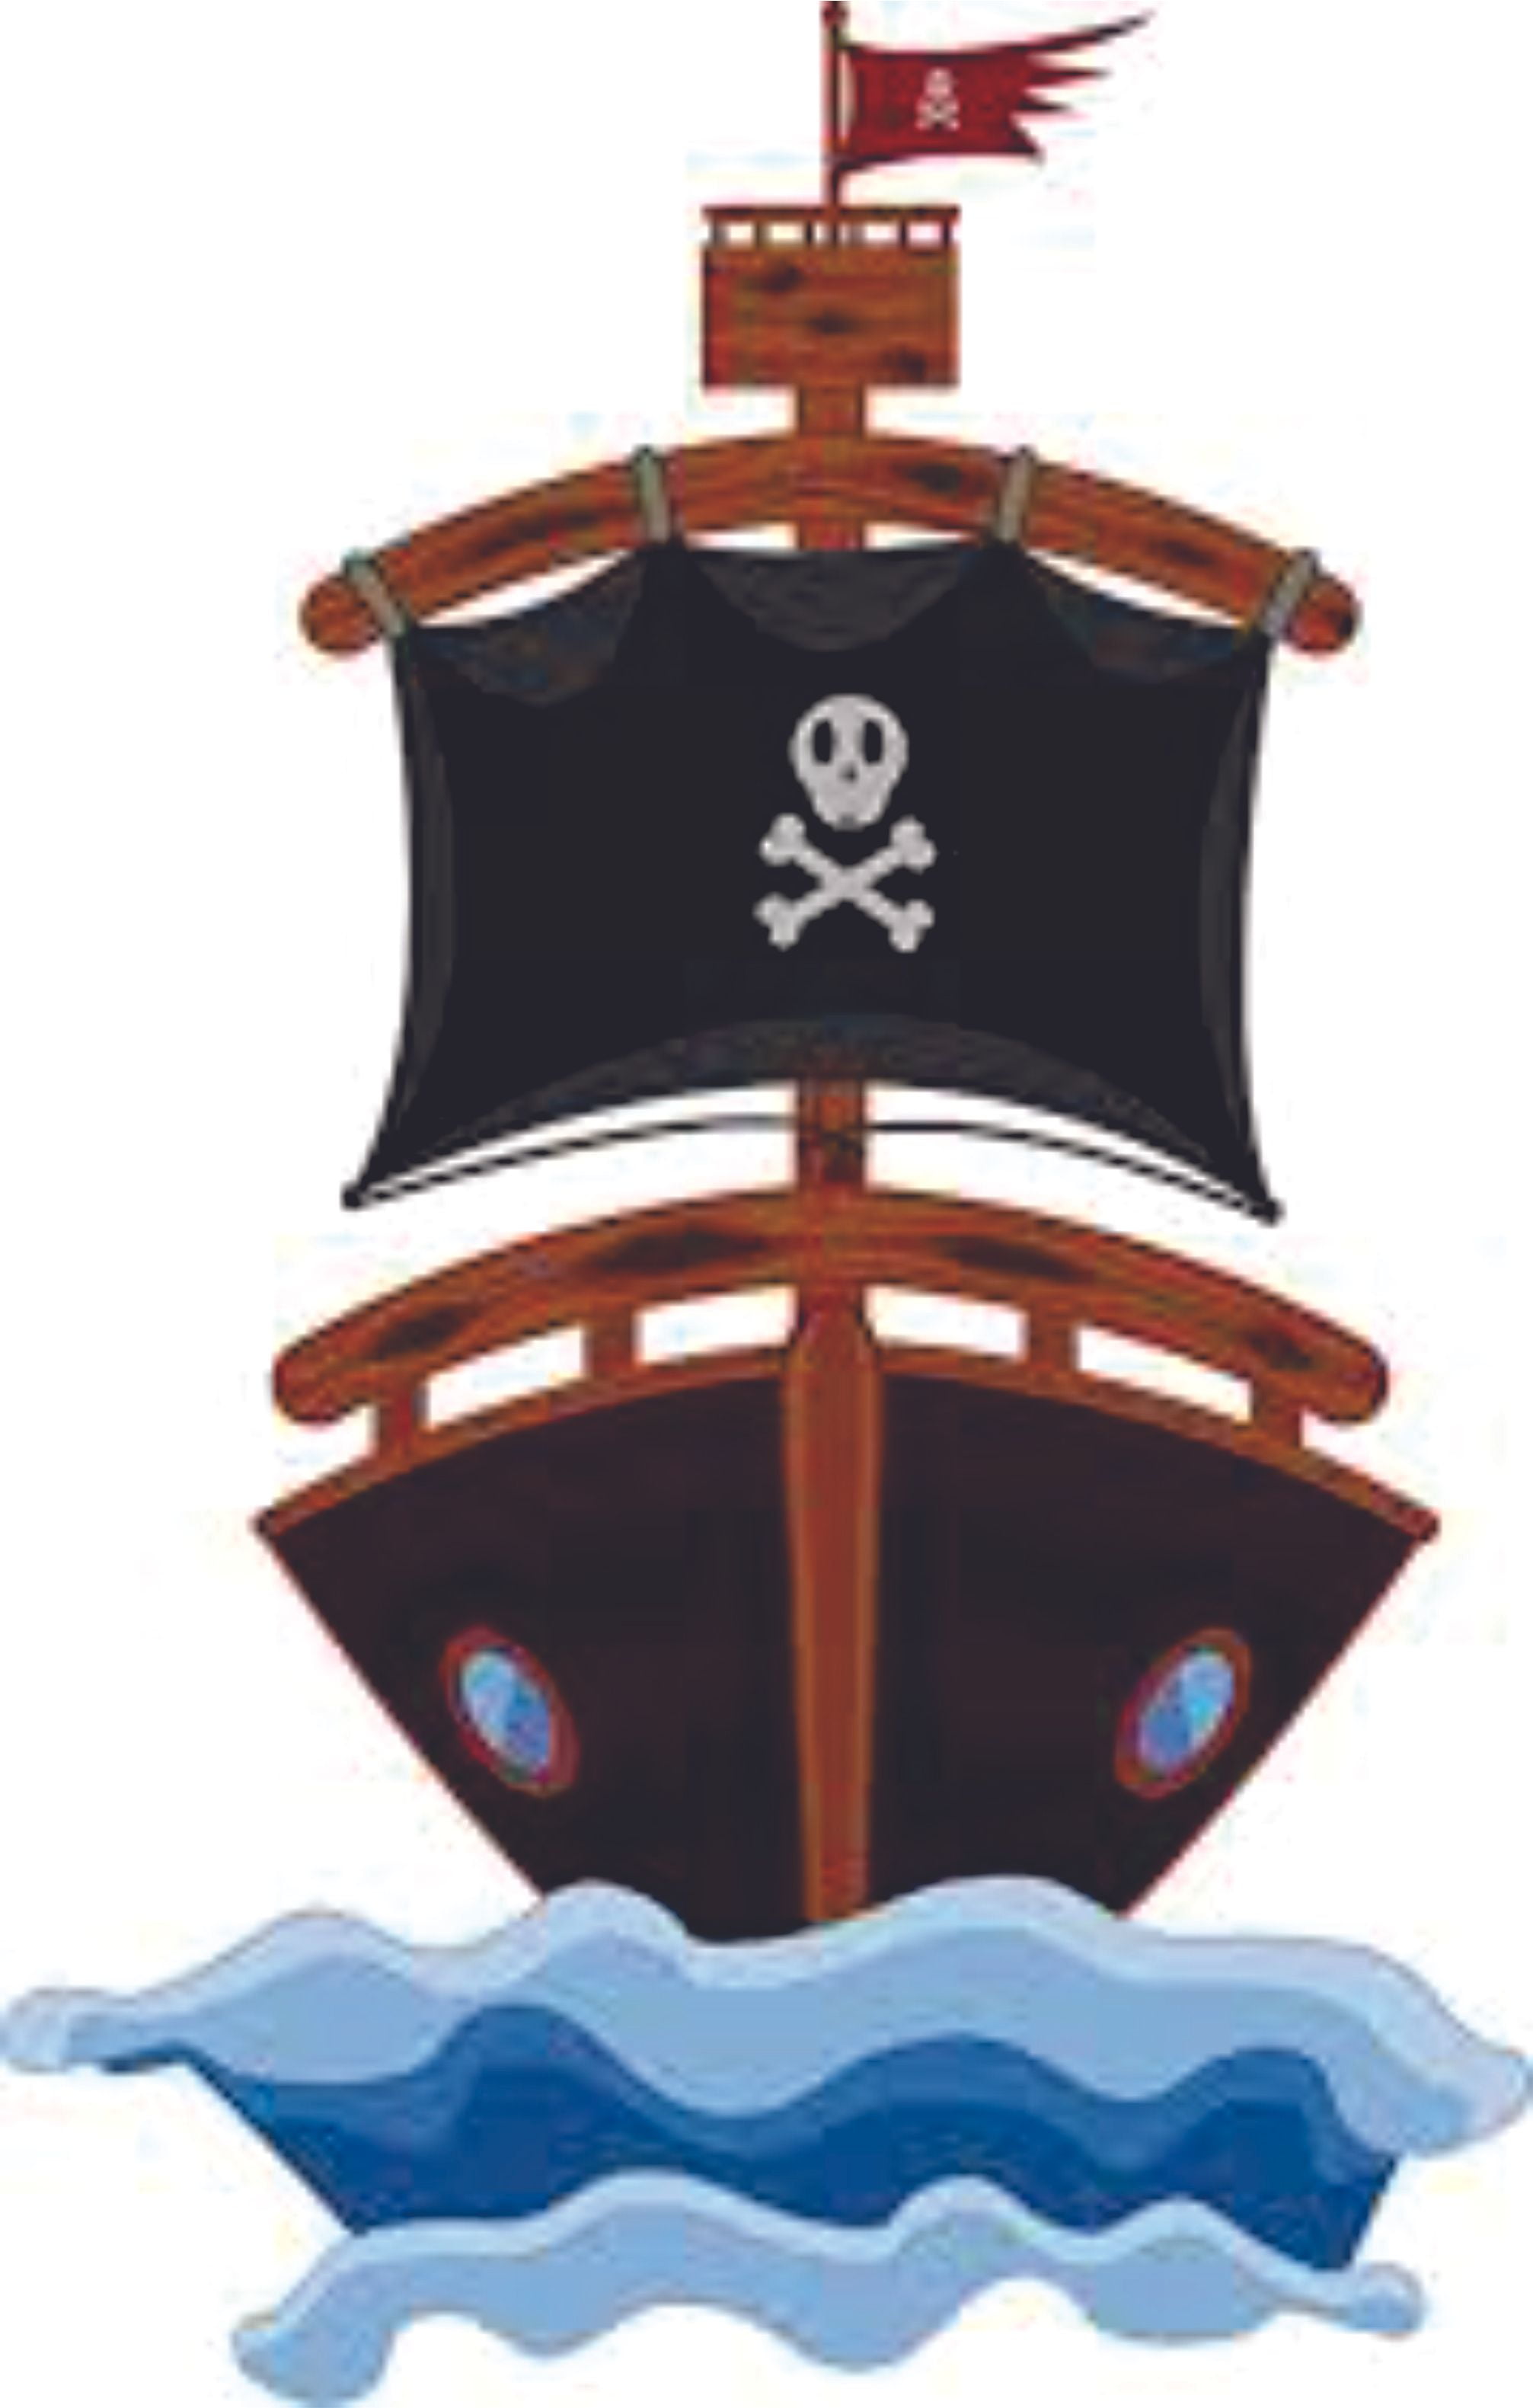 Details about   PIRATE BEDROOM sticker pirates ship stickers personalised kids boys decal vinyl 